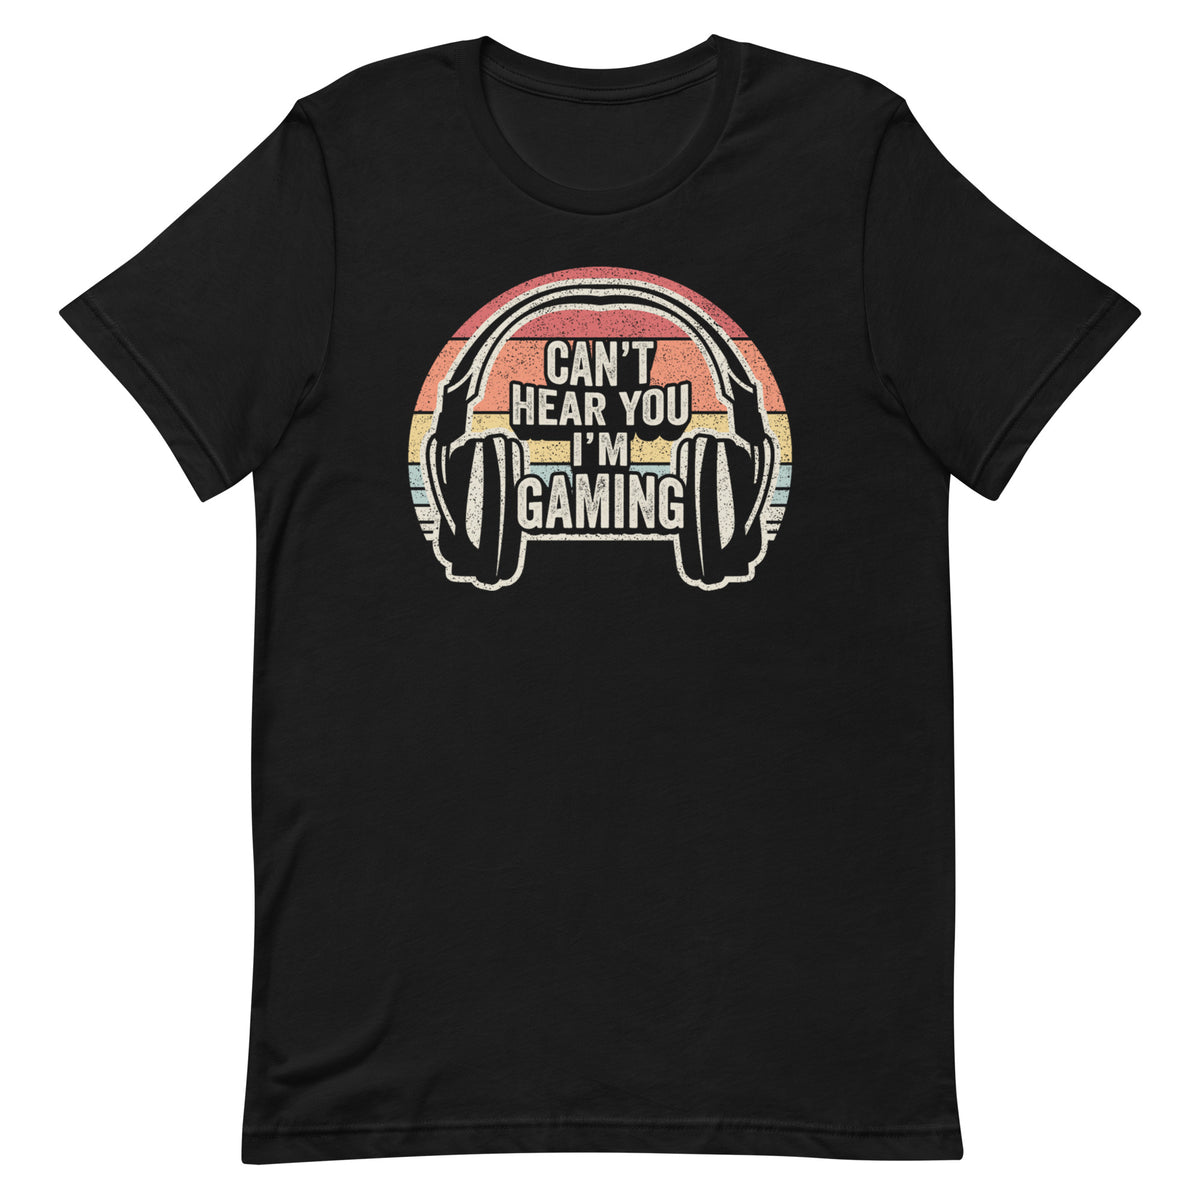 Retro Vintage Can't Hear You I'm Gaming Unisex t-shirt